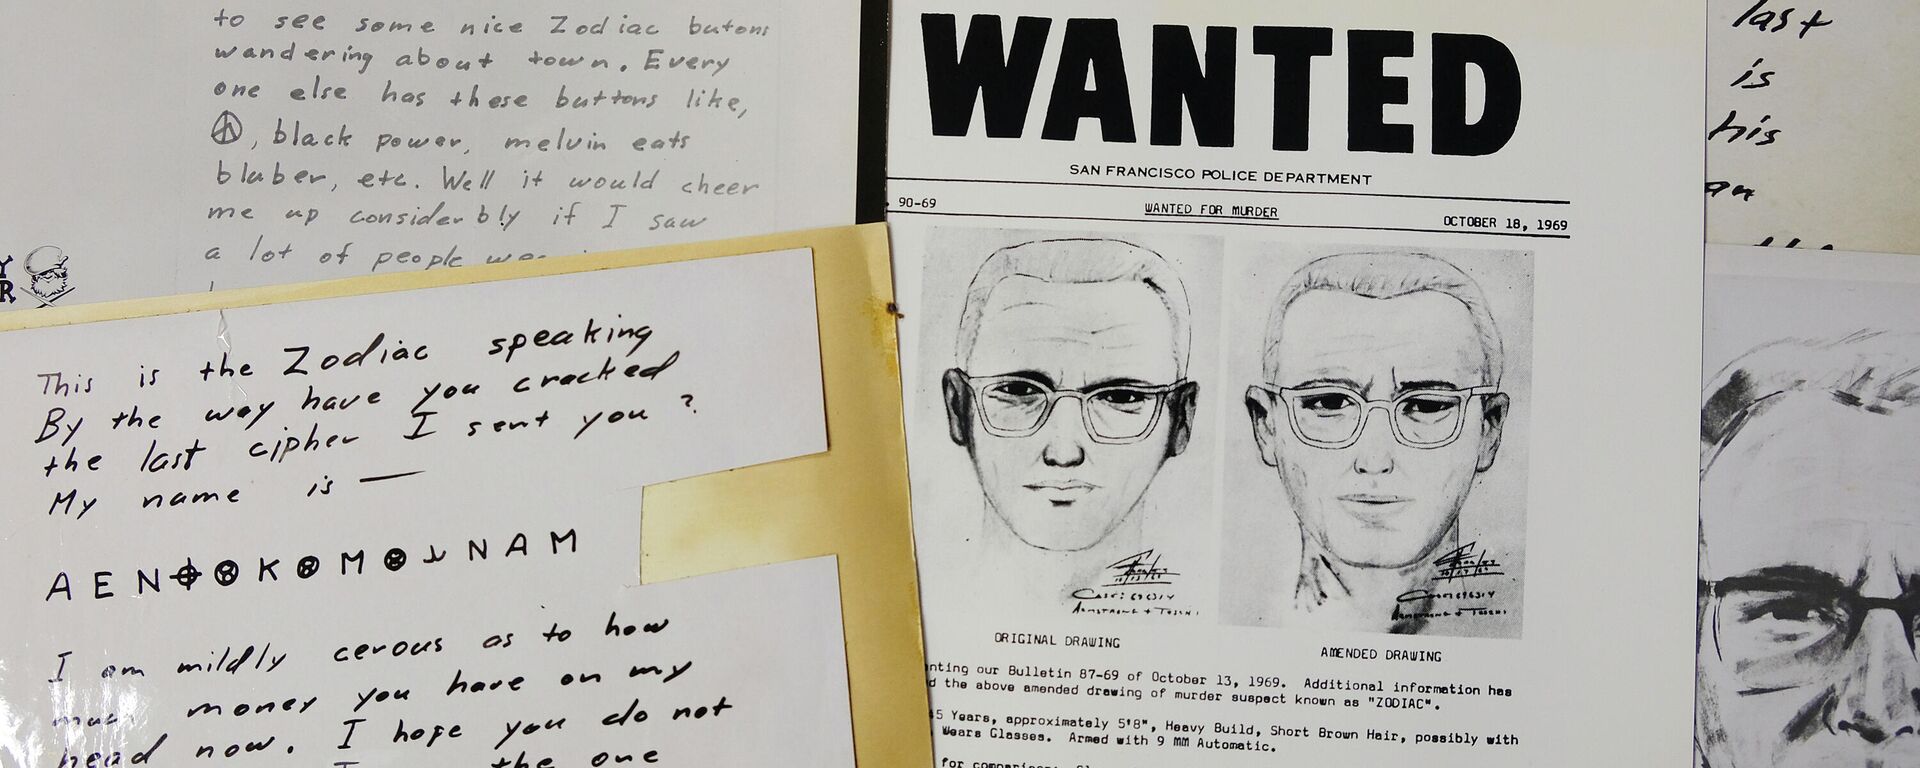 FILE - In this May 3, 2018, file photo, a San Francisco Police Department wanted bulletin and copies of letters sent to the San Francisco Chronicle by a man who called himself Zodiac are displayed in San Francisco. A coded letter mailed to a San Francisco newspaper by the Zodiac serial killer in 1969 has been deciphered by a team of amateur sleuths from the United States, Australia and Belgium, the San Francisco Chronicle reported Friday, Dec. 11, 2020. (AP Photo/Eric Risberg, File) - Sputnik International, 1920, 07.10.2021